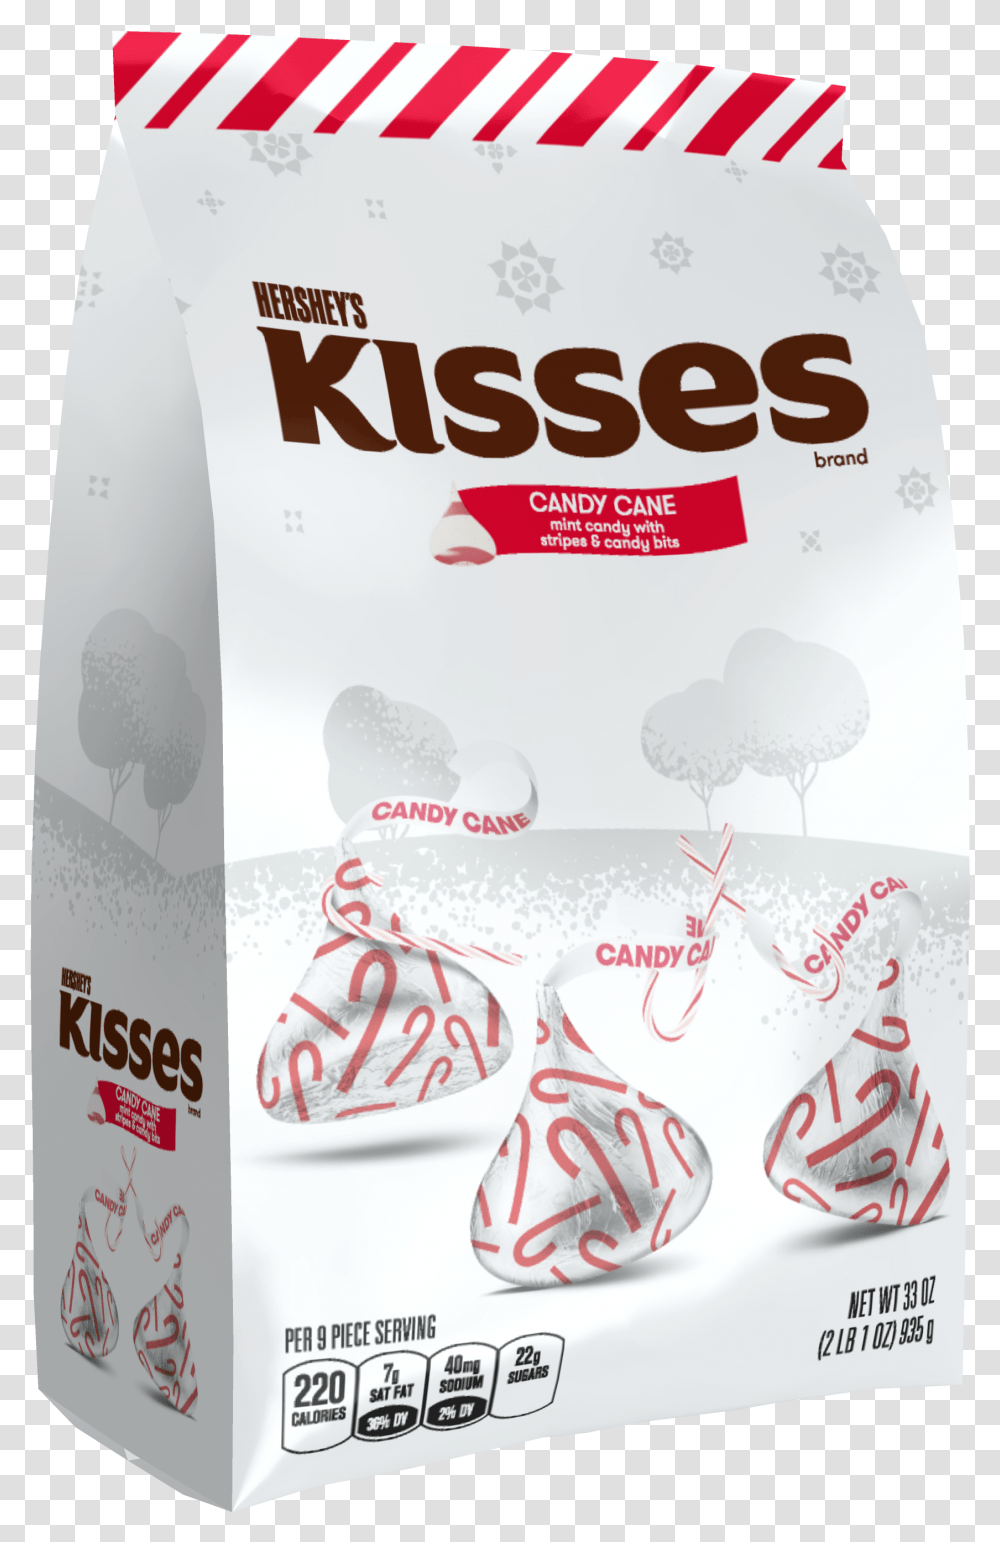 Upc Product Image For Hersheyquots Kisses Candy Cane Hershey Kisses, Beverage, Drink, Alcohol, Food Transparent Png